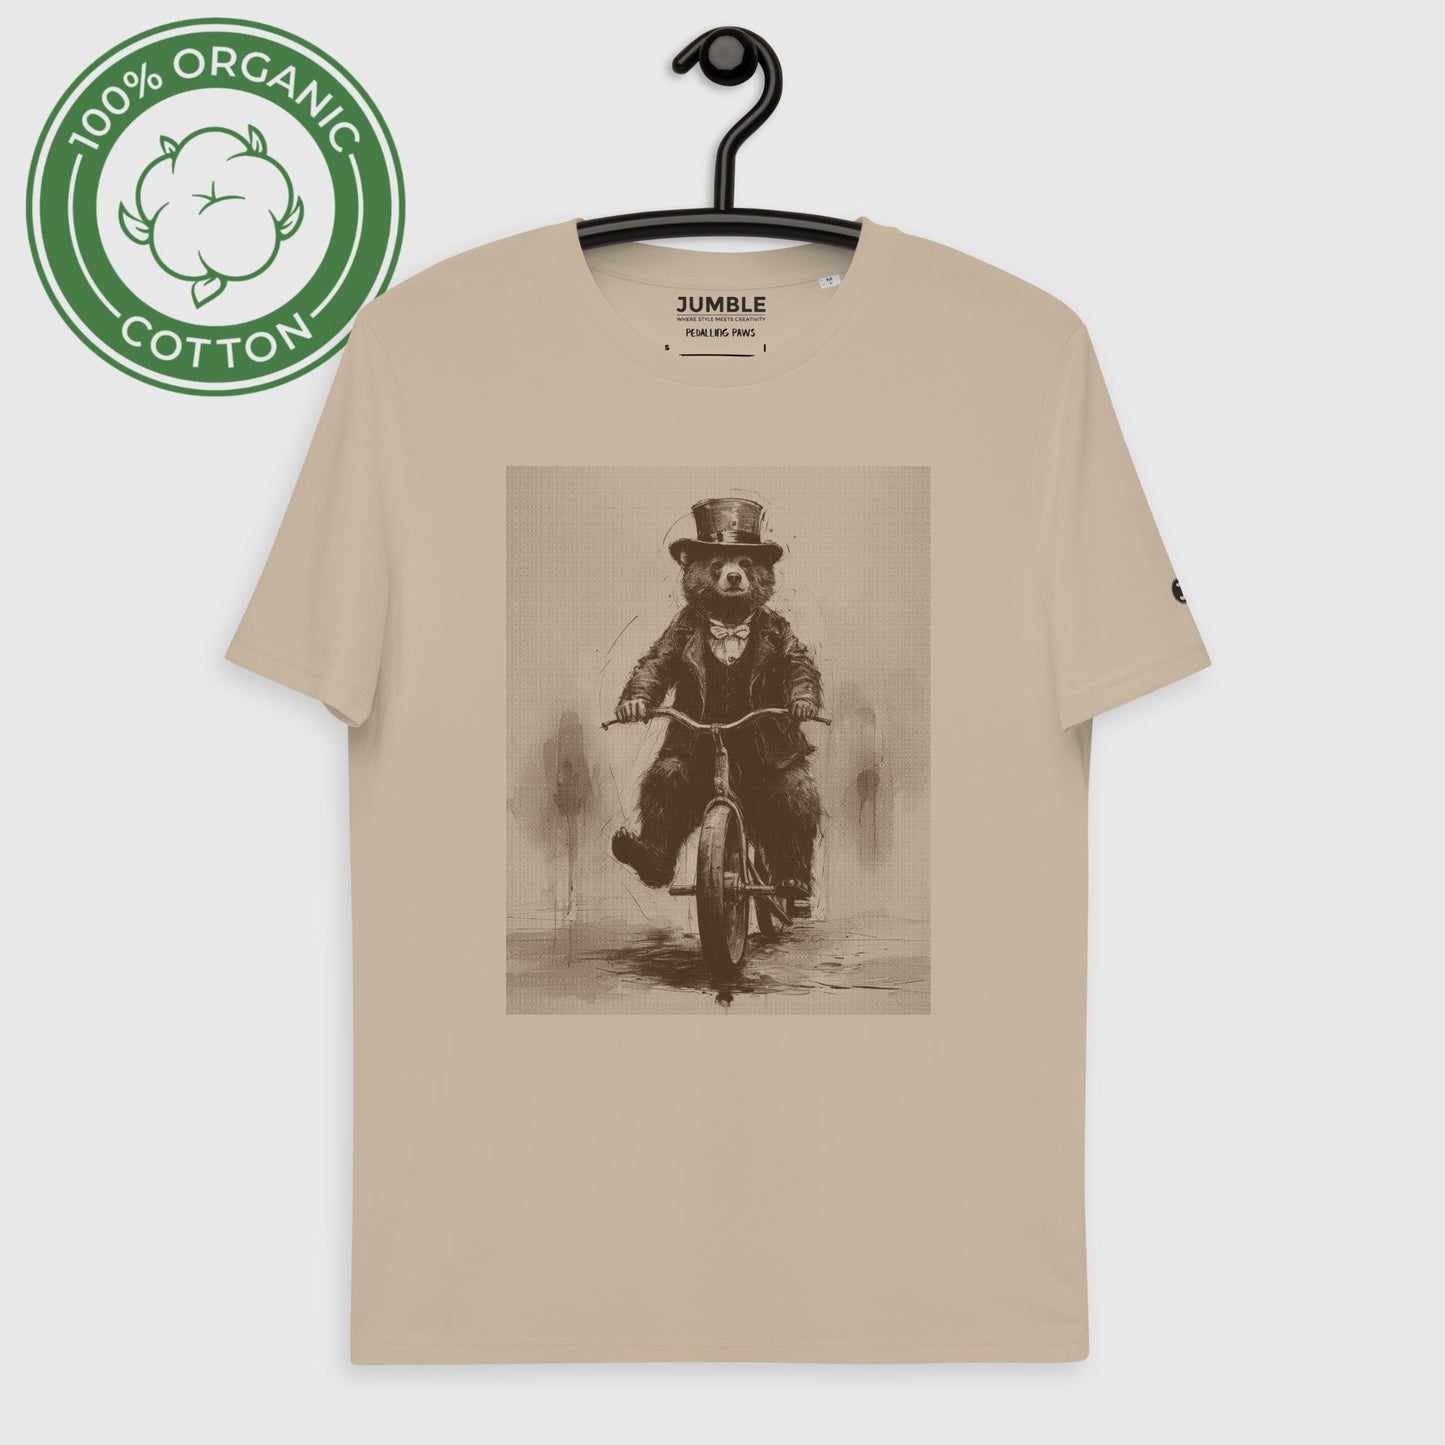 Pedalling Paws Unisex organic cotton t-shirt in desert dust colour, displayed on hanger